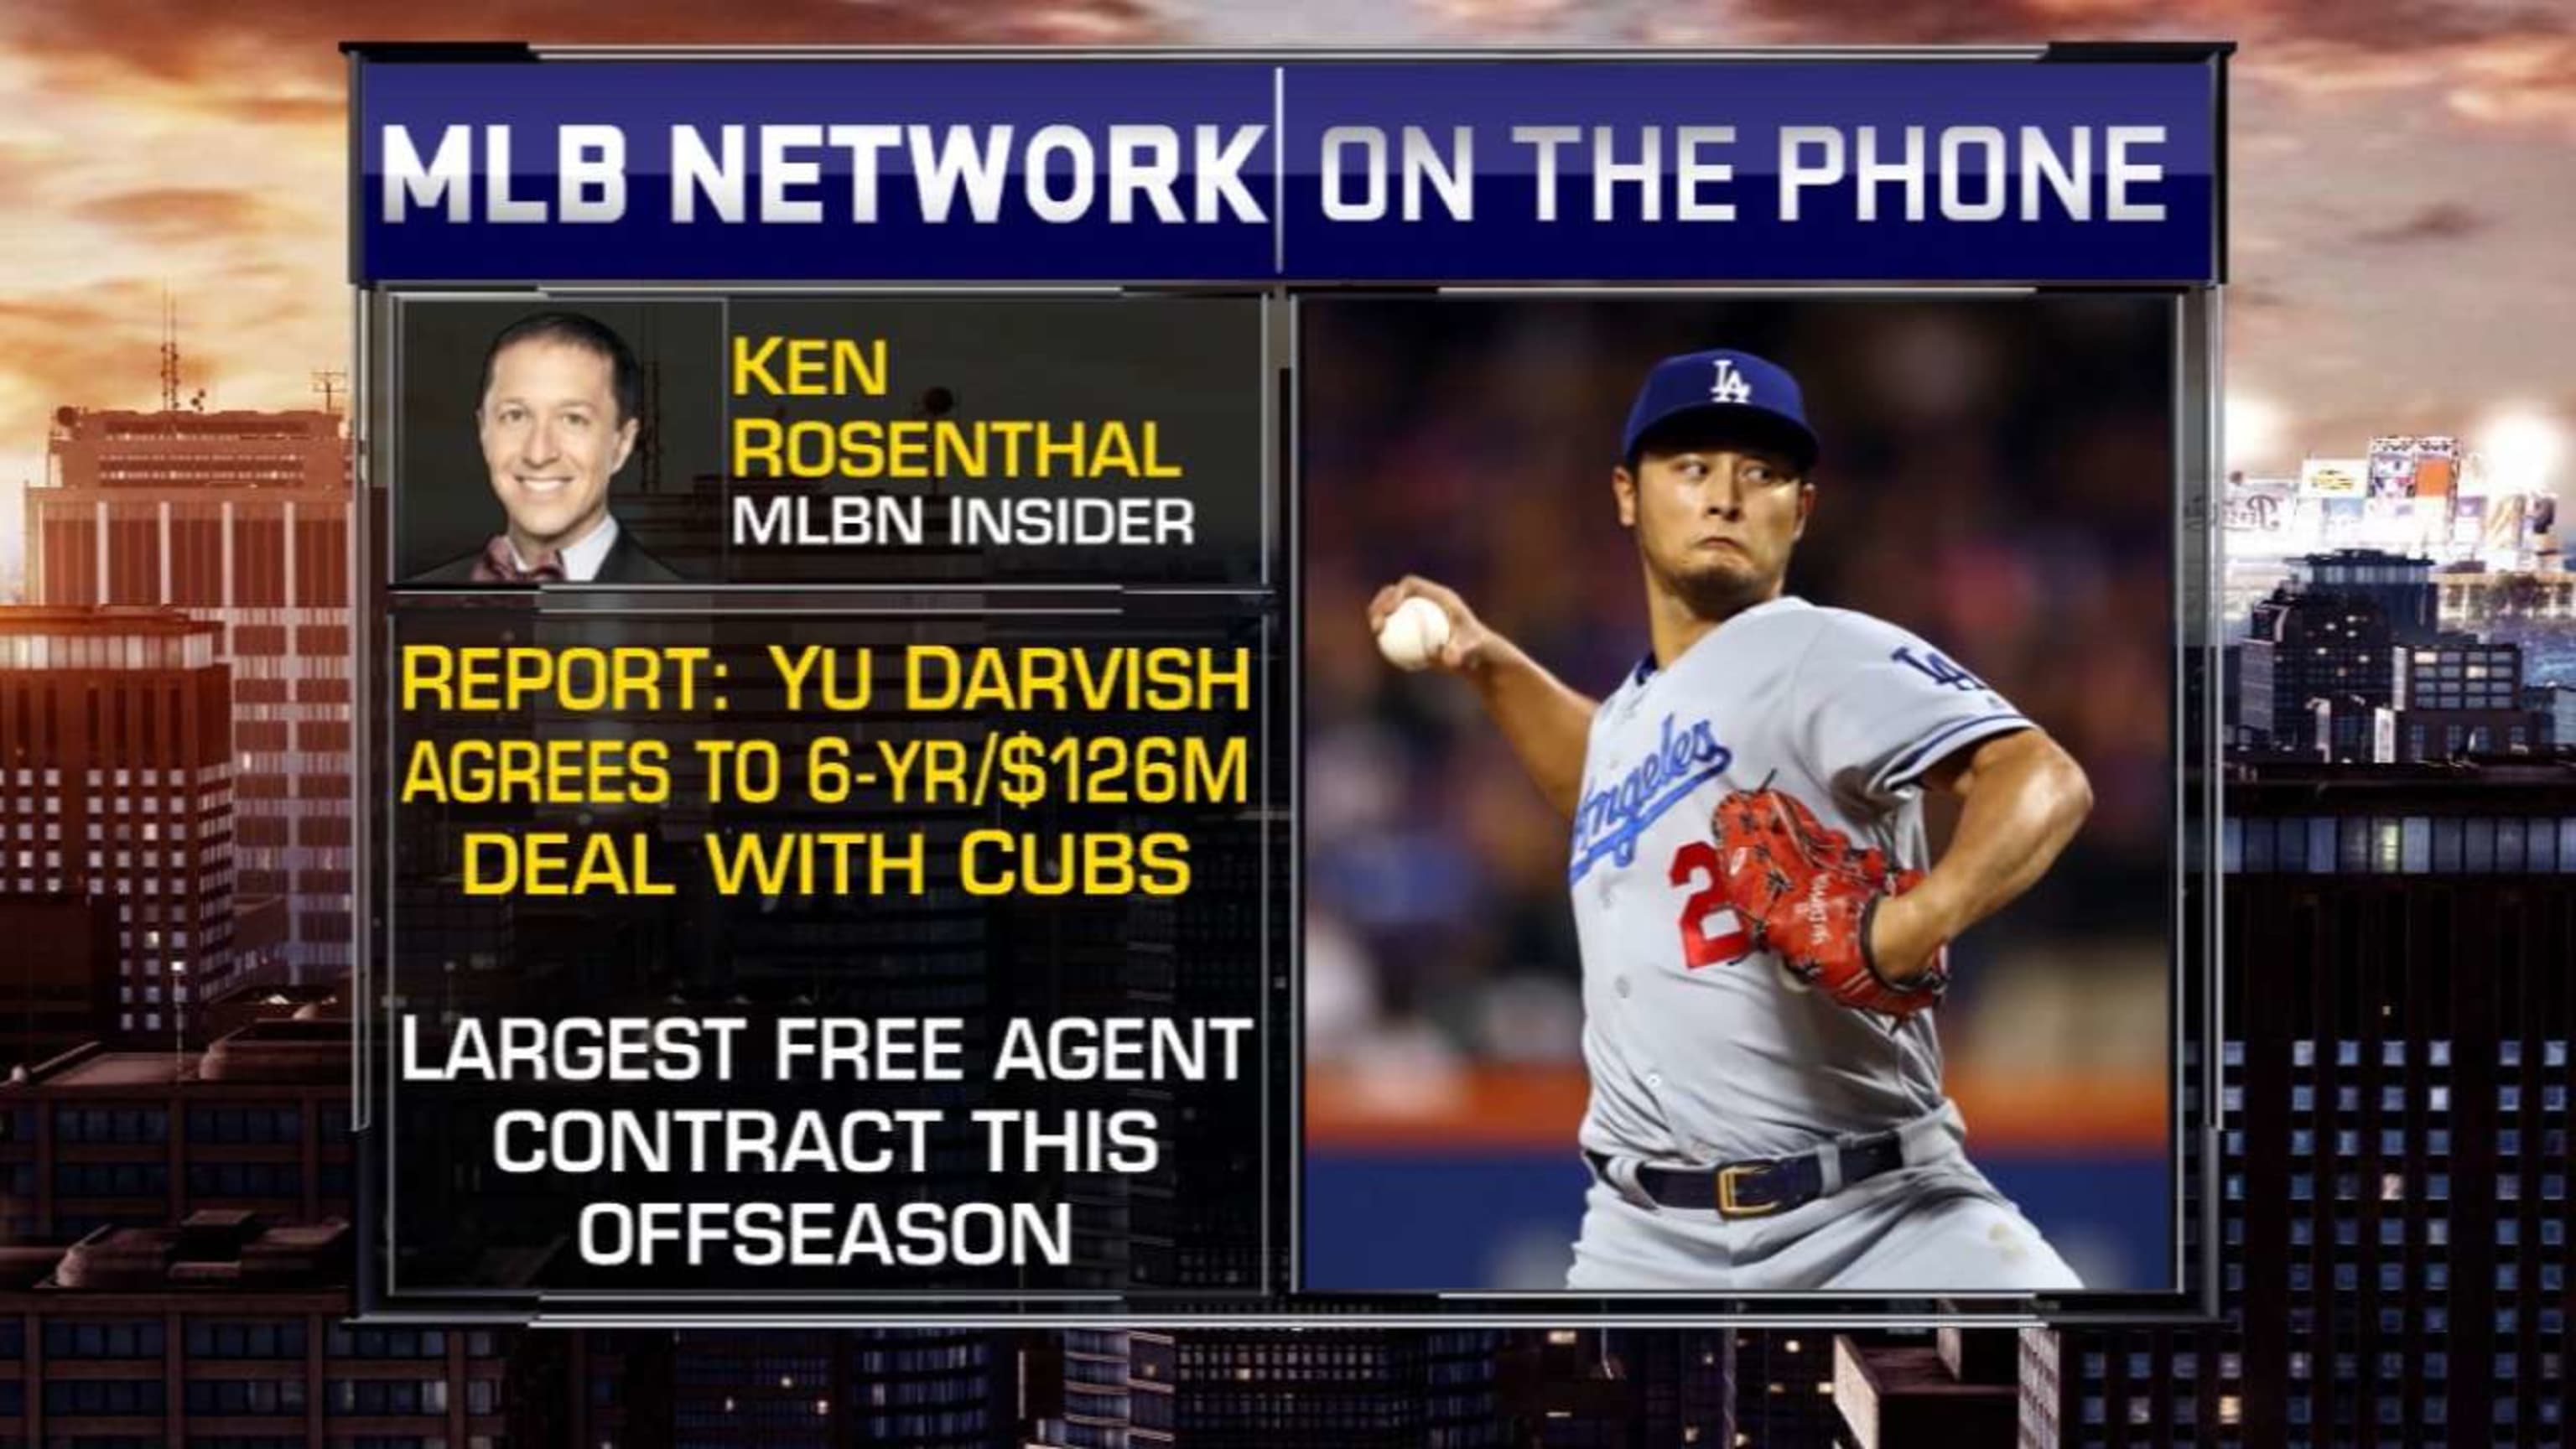 Tom Verducci: How the Rangers plan to transition Yu Darvish to the